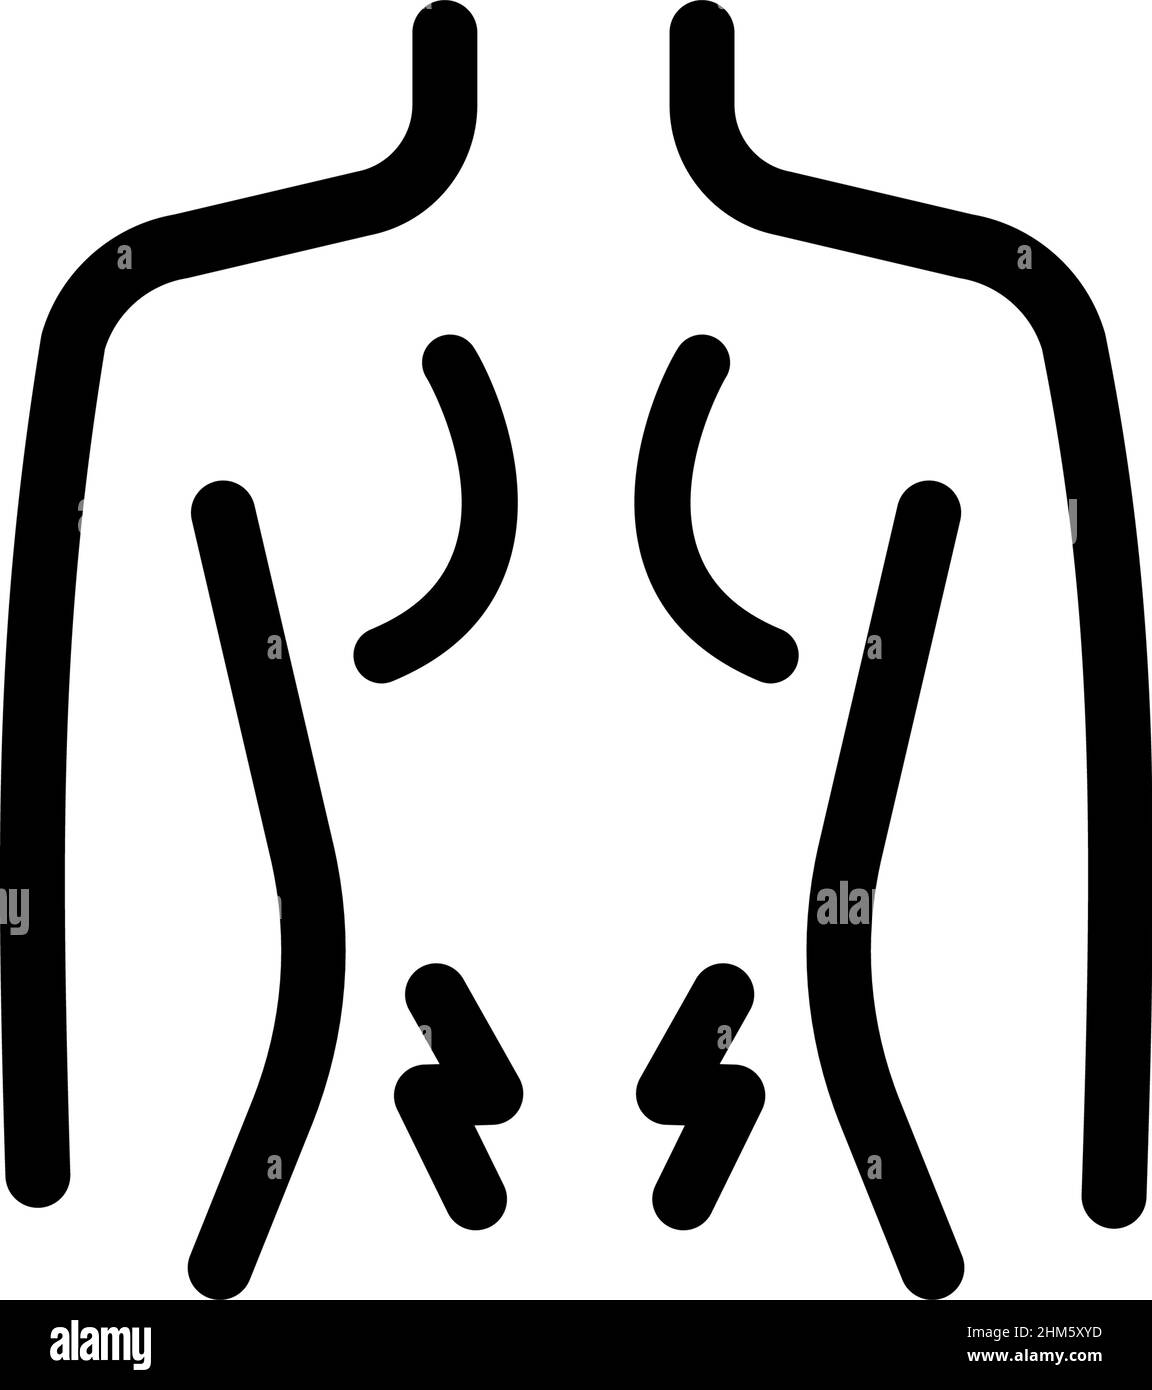 Back pain outline icon. Lower back or kidney. Pms or menopause symptom. Premium quality graphic design icon. Outline symbol for websites, web design, Stock Vector